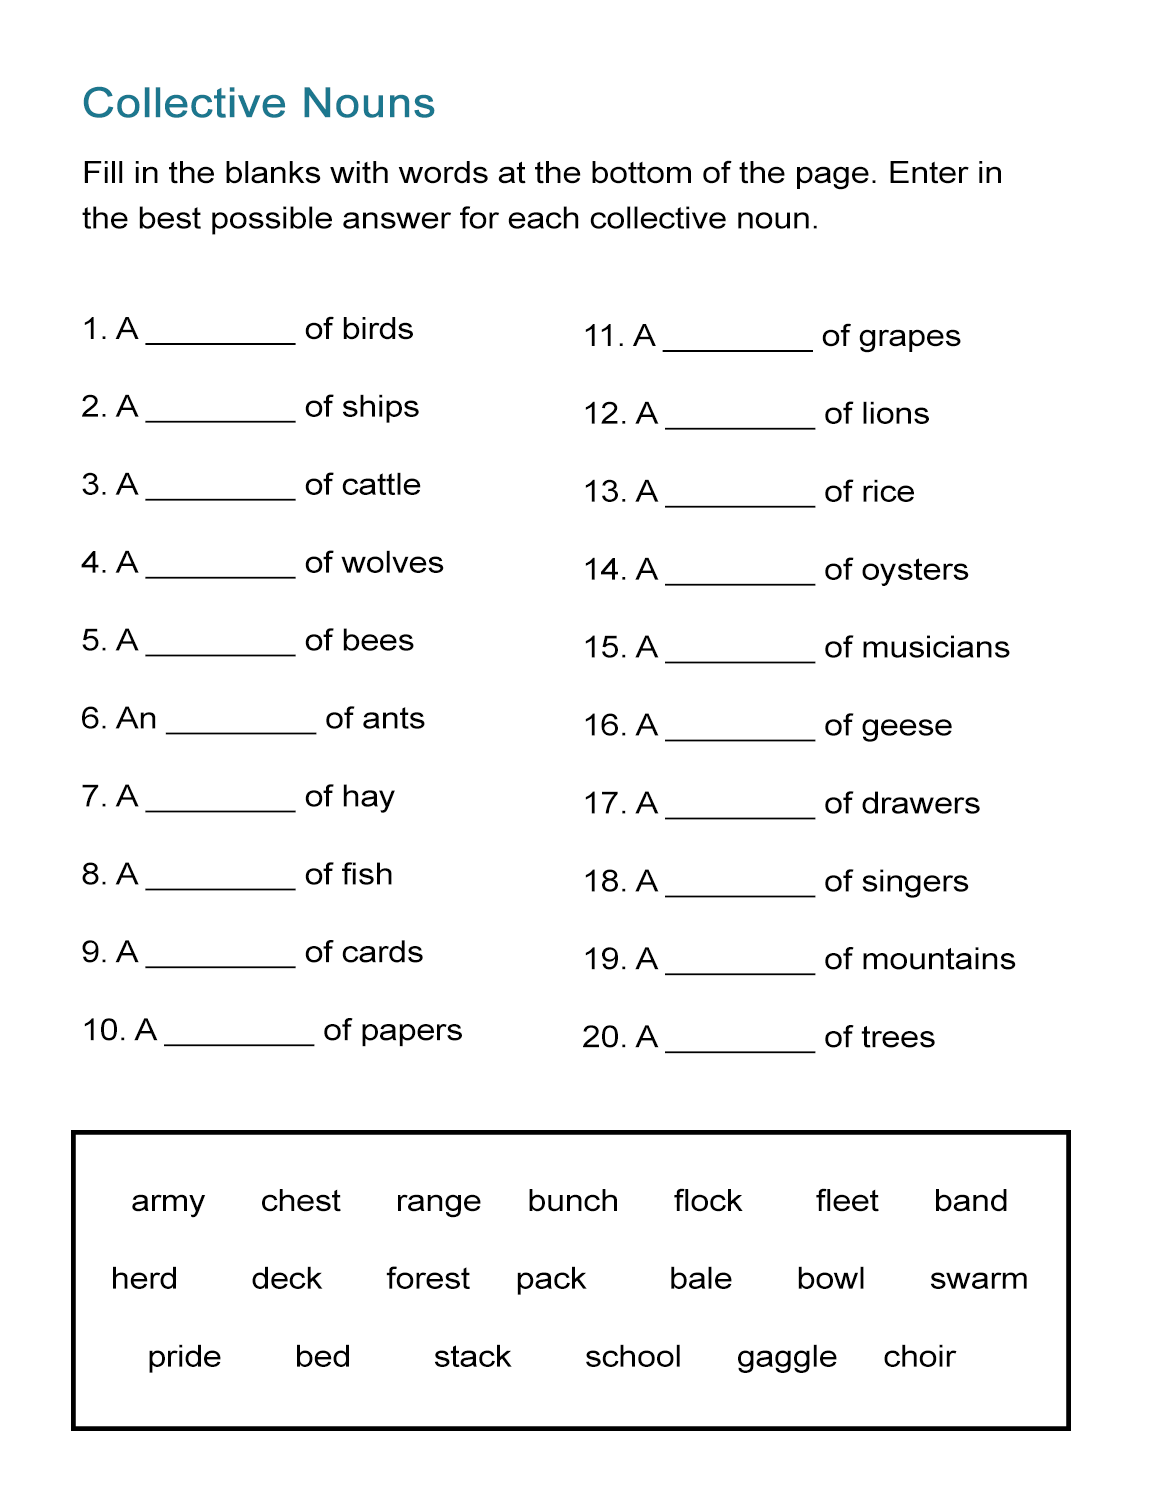 Collective Nouns Online Worksheet Noun Types Worksheet 1 Answers Hot Sex Picture